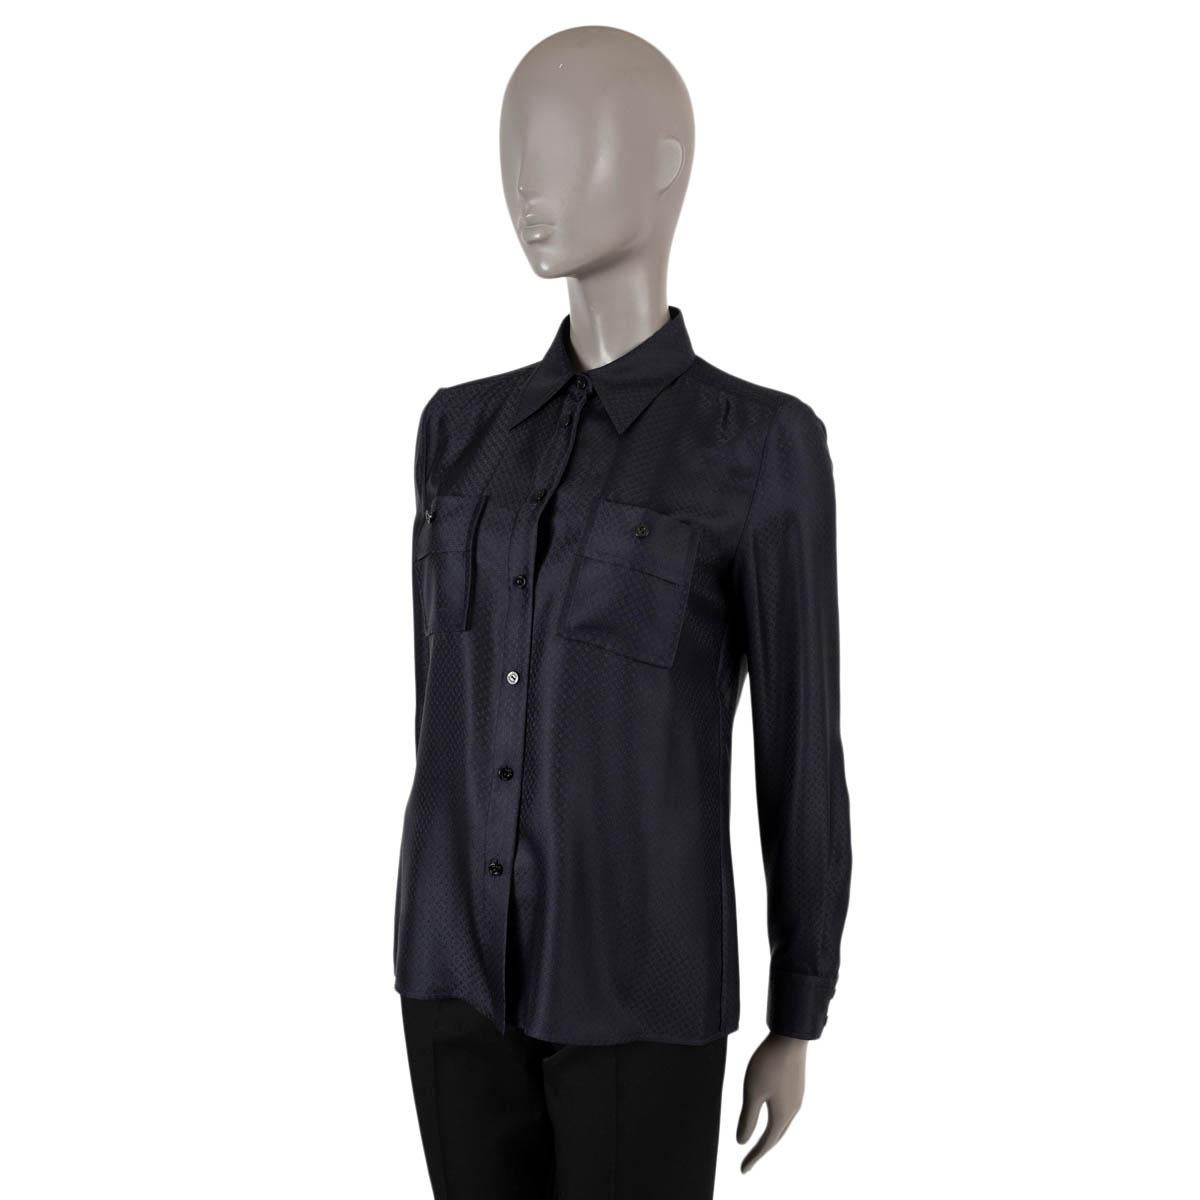 100% authentic Louis Vuitton mini monogram button-up shirt in midnight blue silk (100%). Features two buttoned chest pockets. Brand new with tag.

2020 Pre-Fall

Measurements
Model	RW202W VUS FJBL16
Tag Size	36
Size	XS
Shoulder Width	37cm